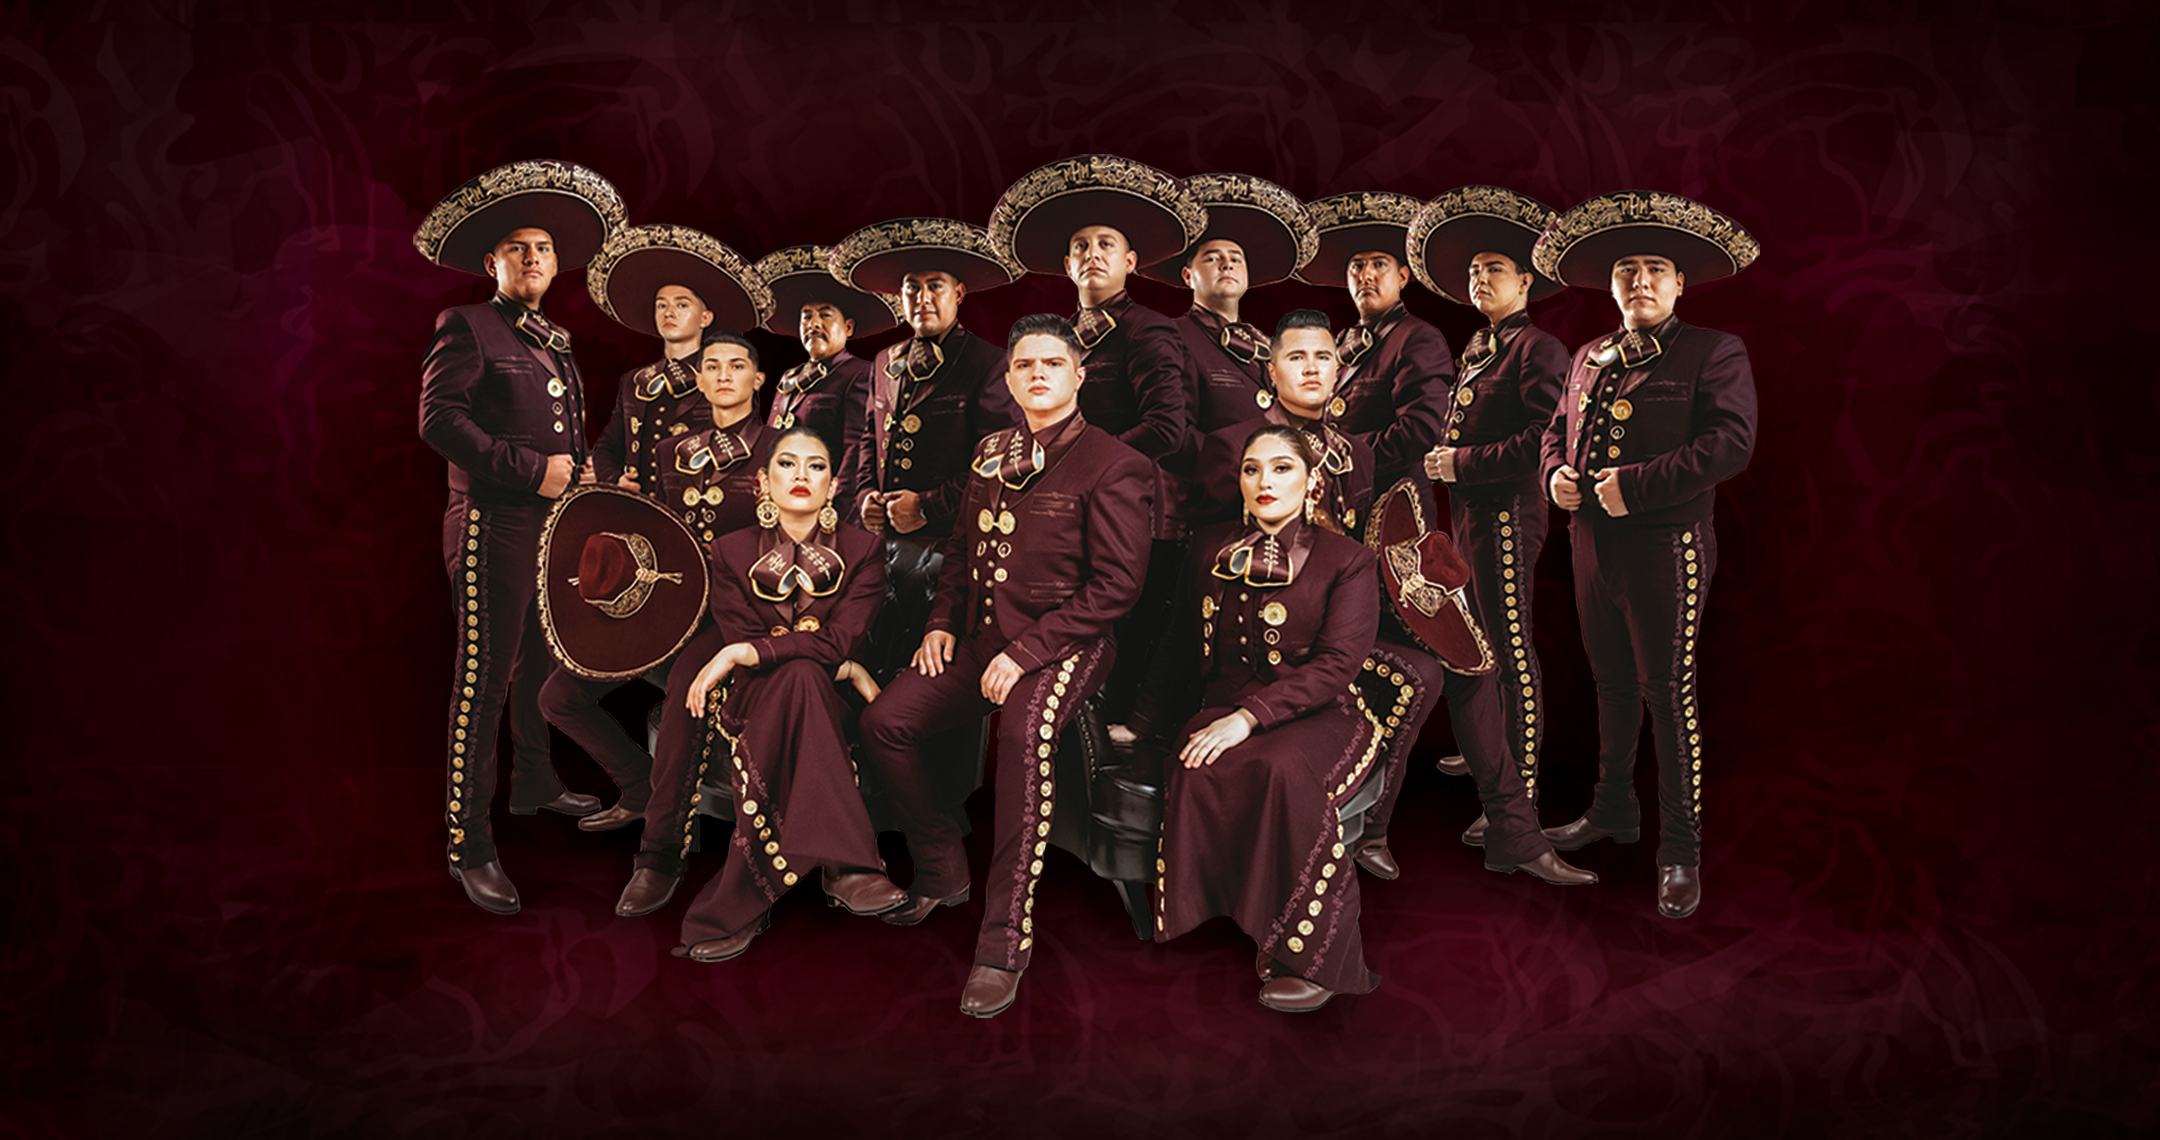 Mariachi Herencia de Mexico at Kohler Memorial Theater on Friday, March 10